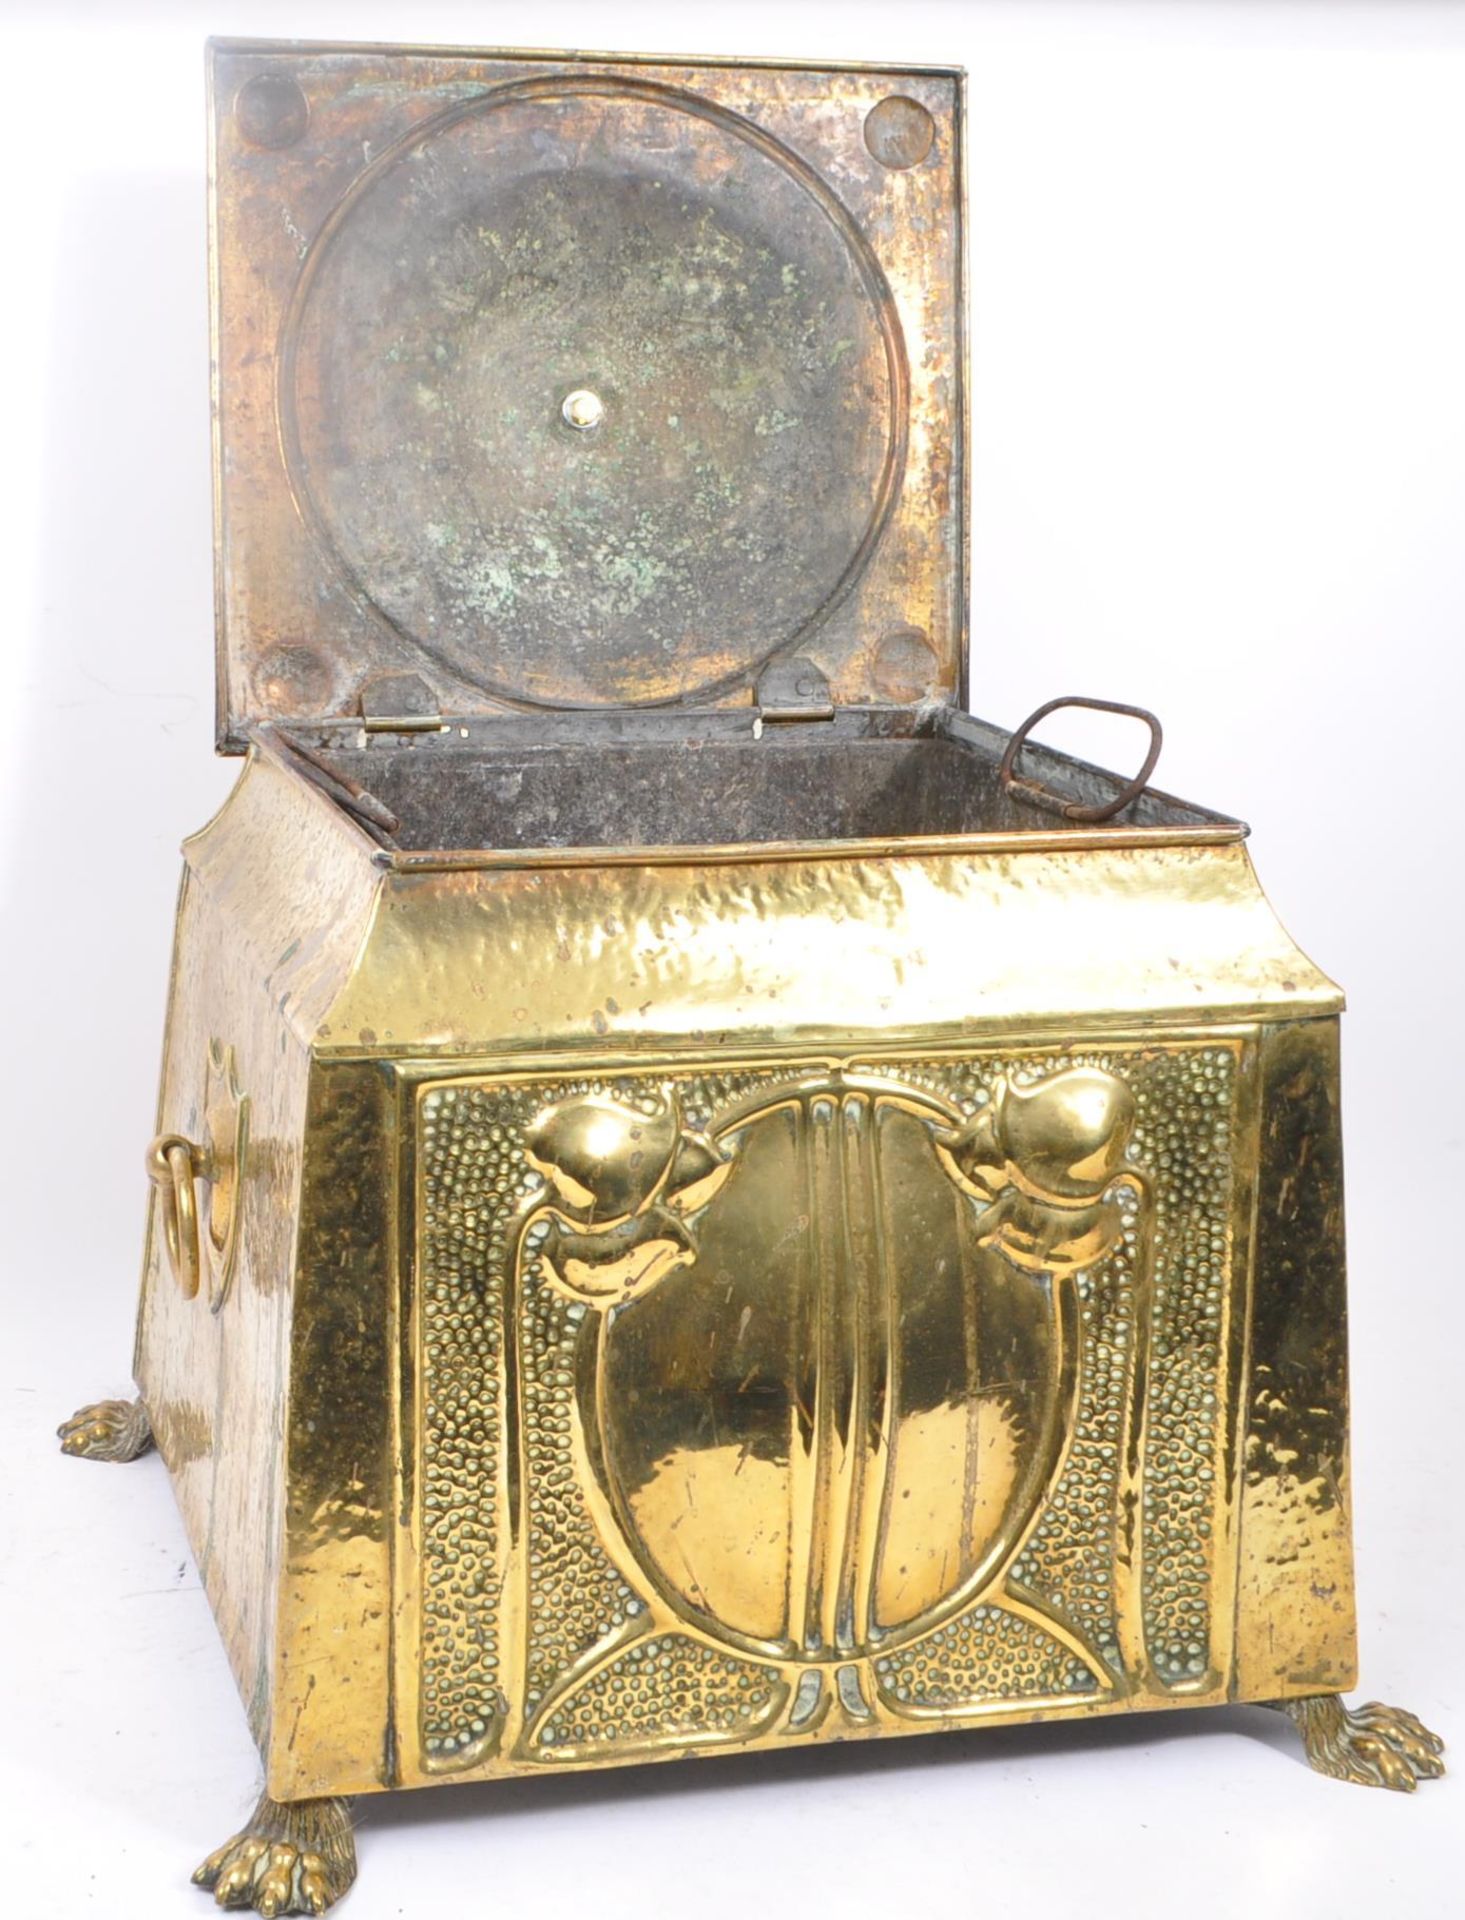 EARLY 20TH CENTURY BRASS ART NOUVEAU COAL SCUTTLE - Image 7 of 7